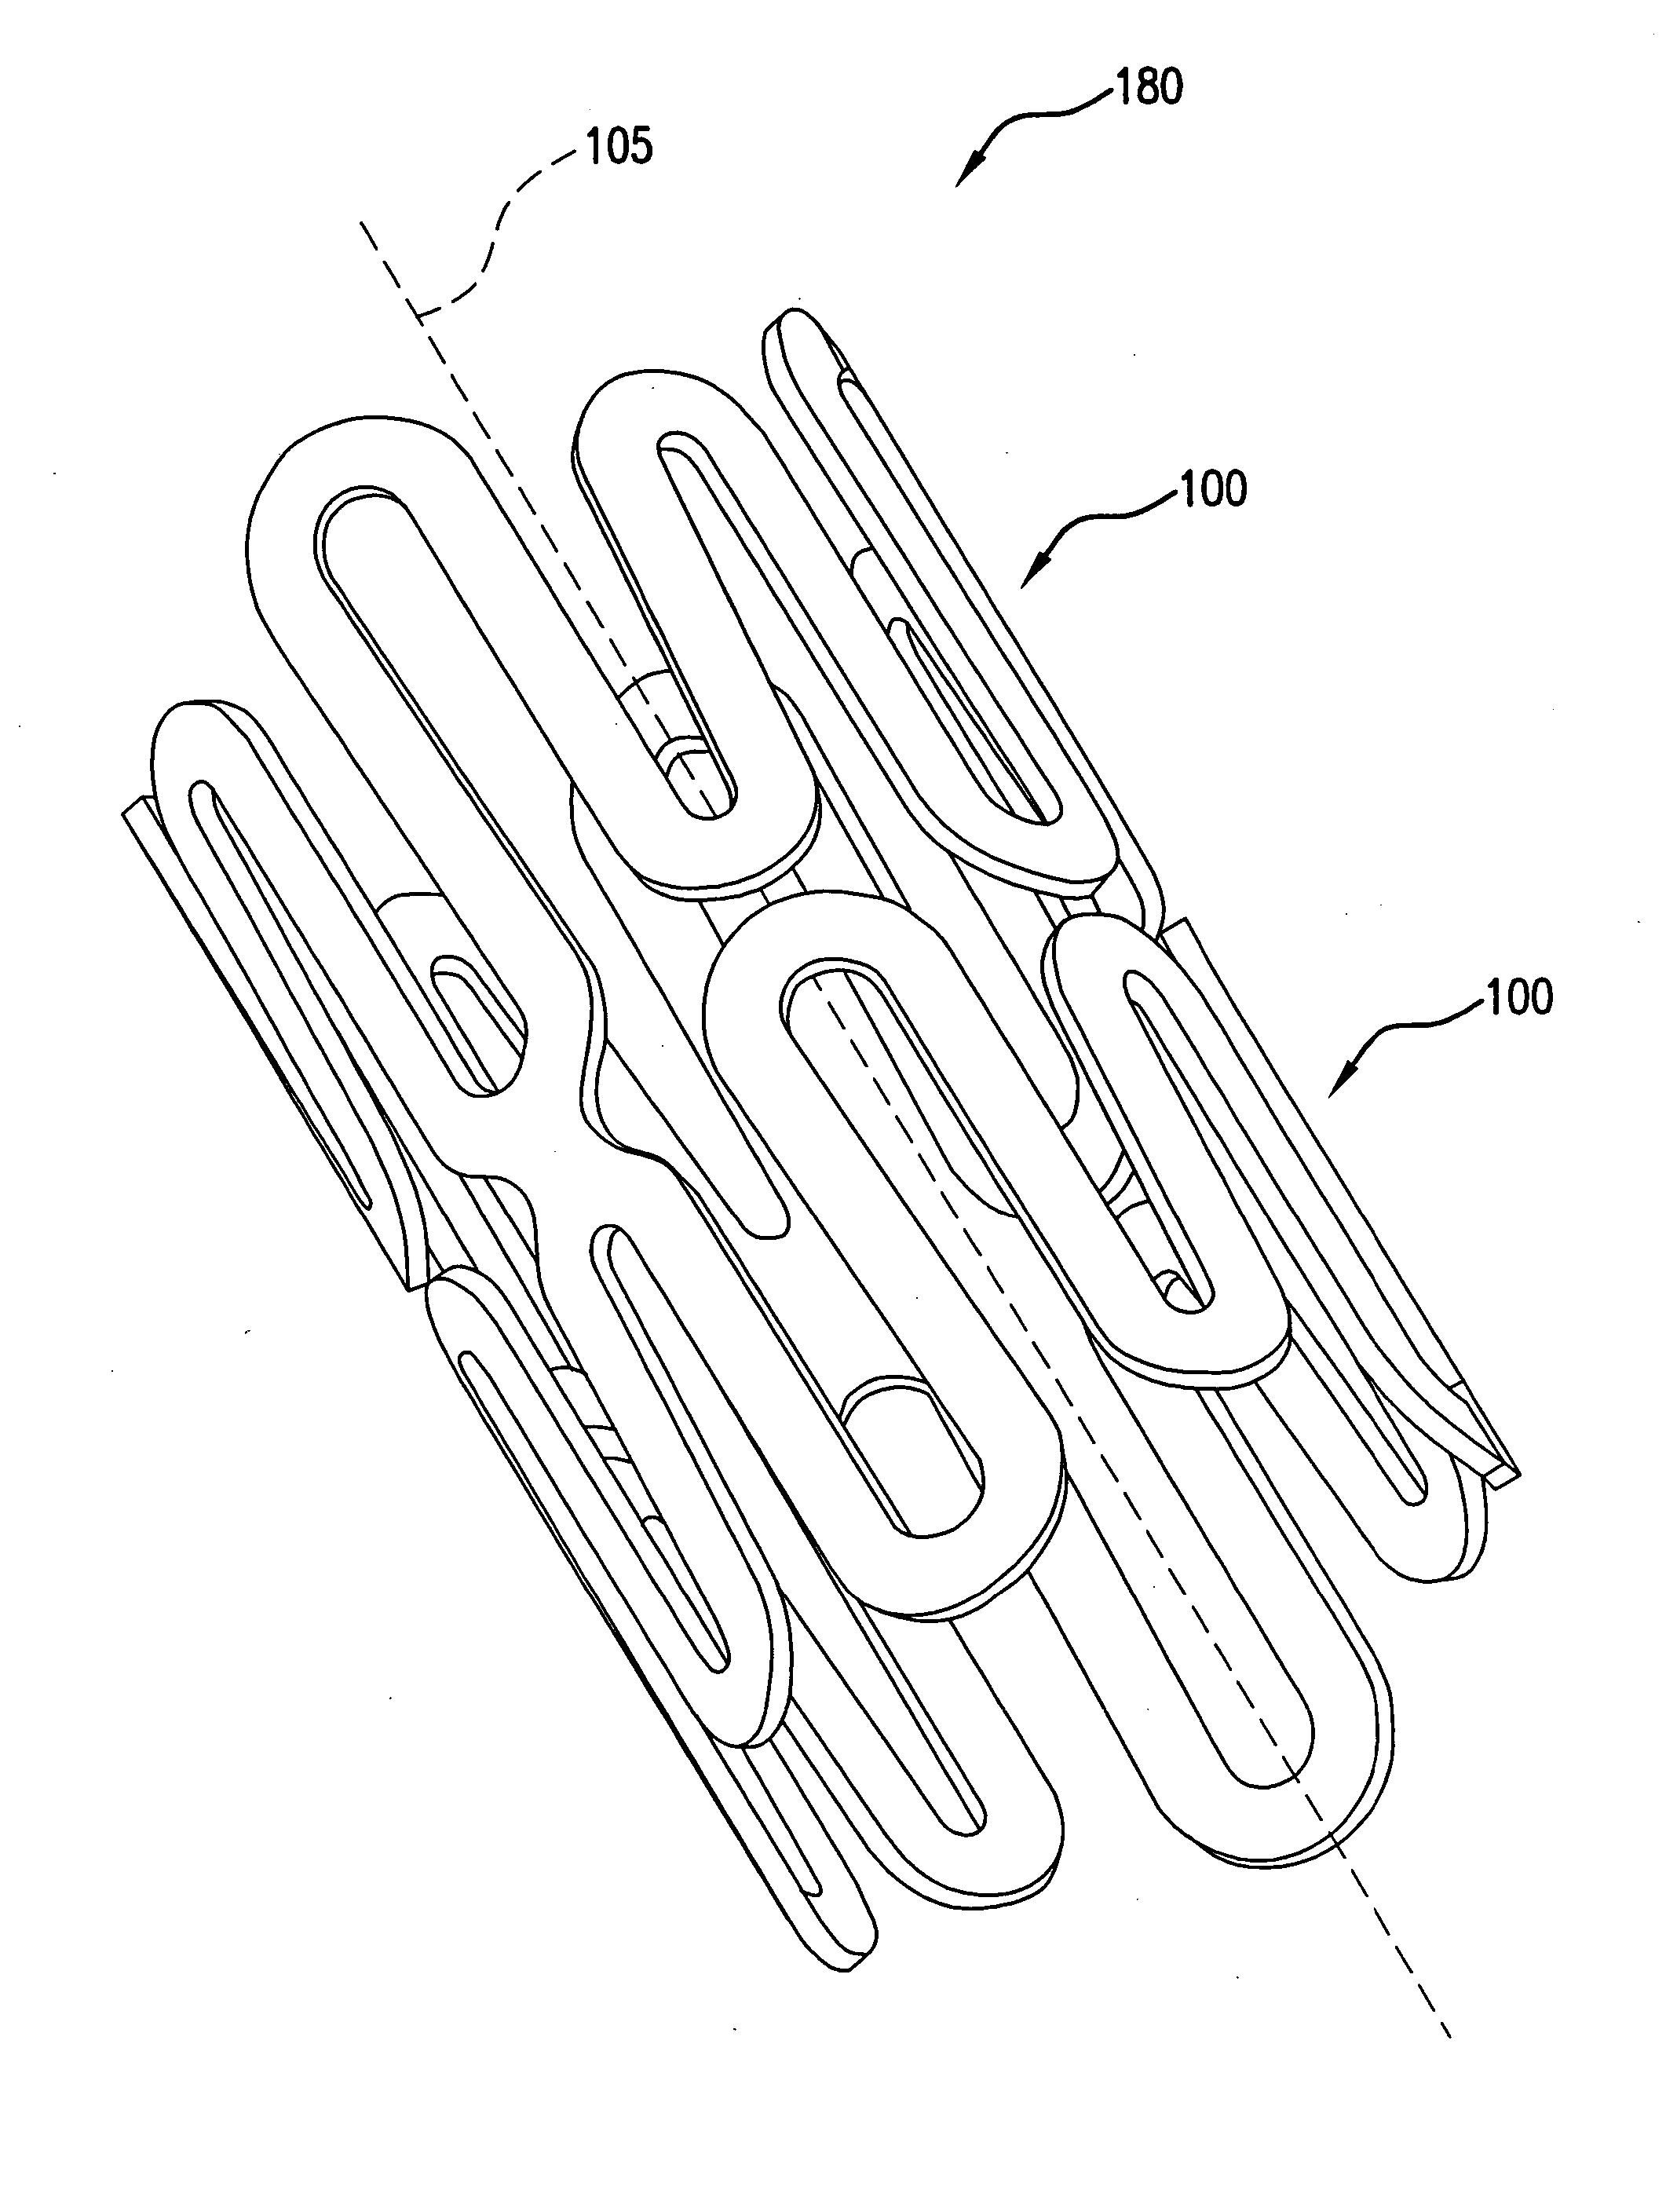 Intralumenal stent device for use in body lumens of various diameters